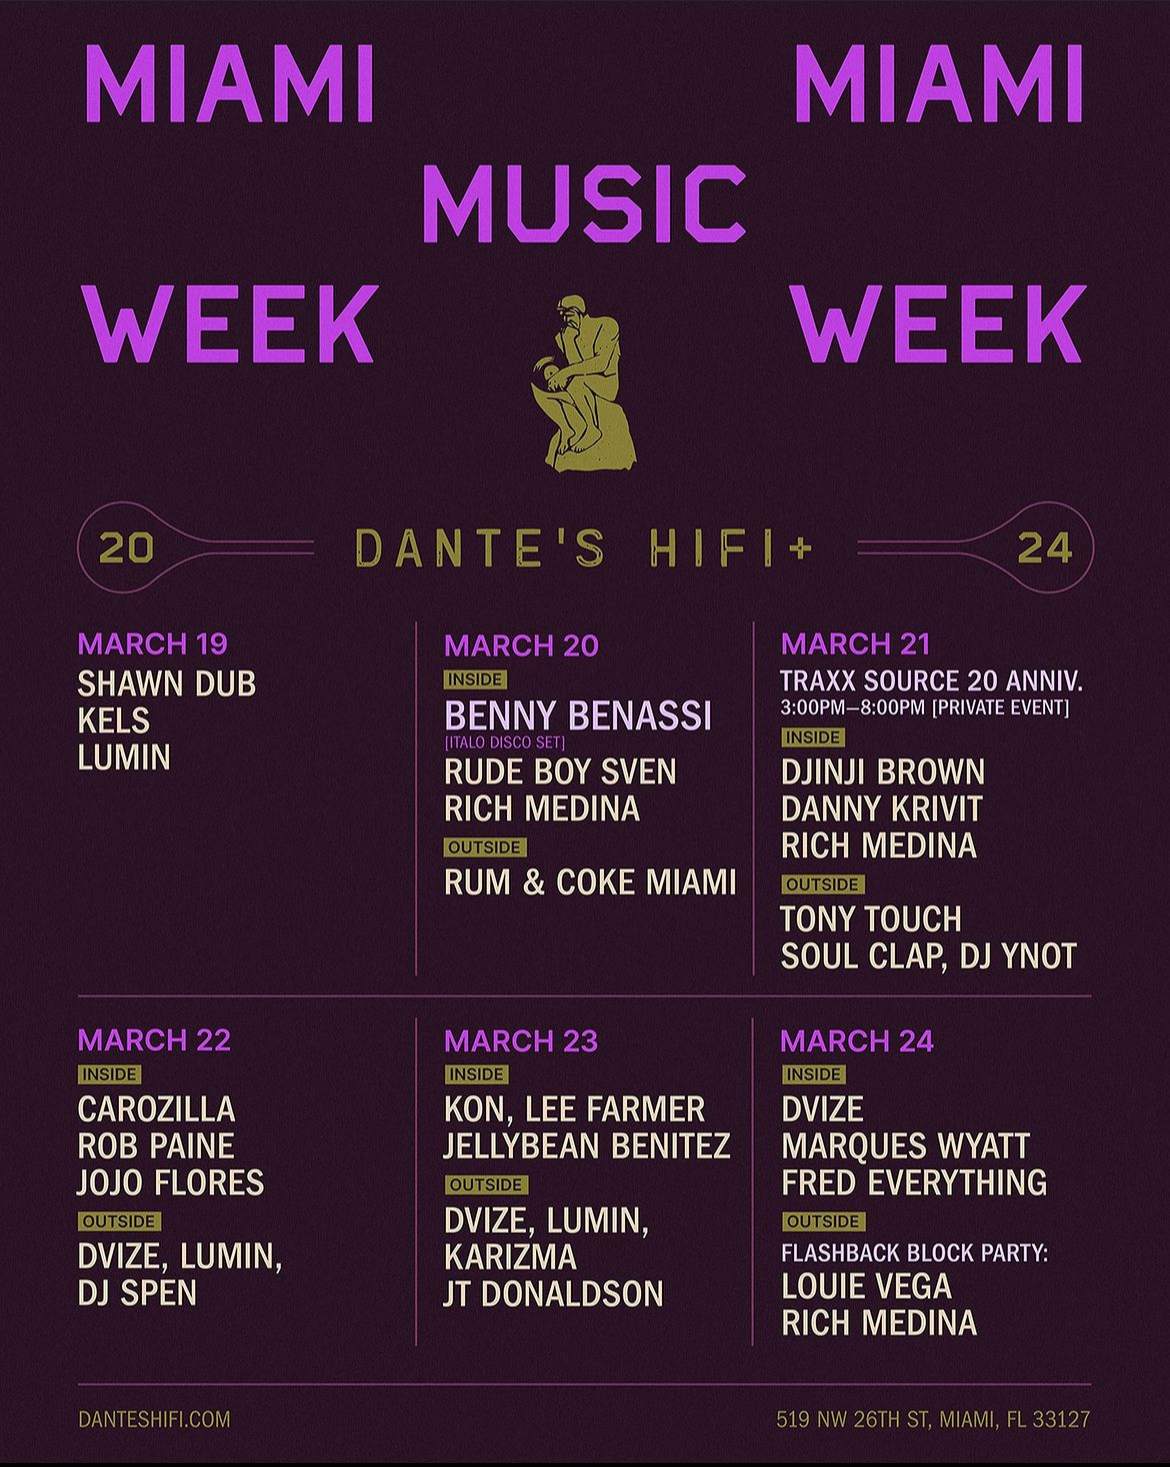 Dvize + Marques Wyatt + Fred Everything and Louie Vega + Rich Medina - フライヤー表